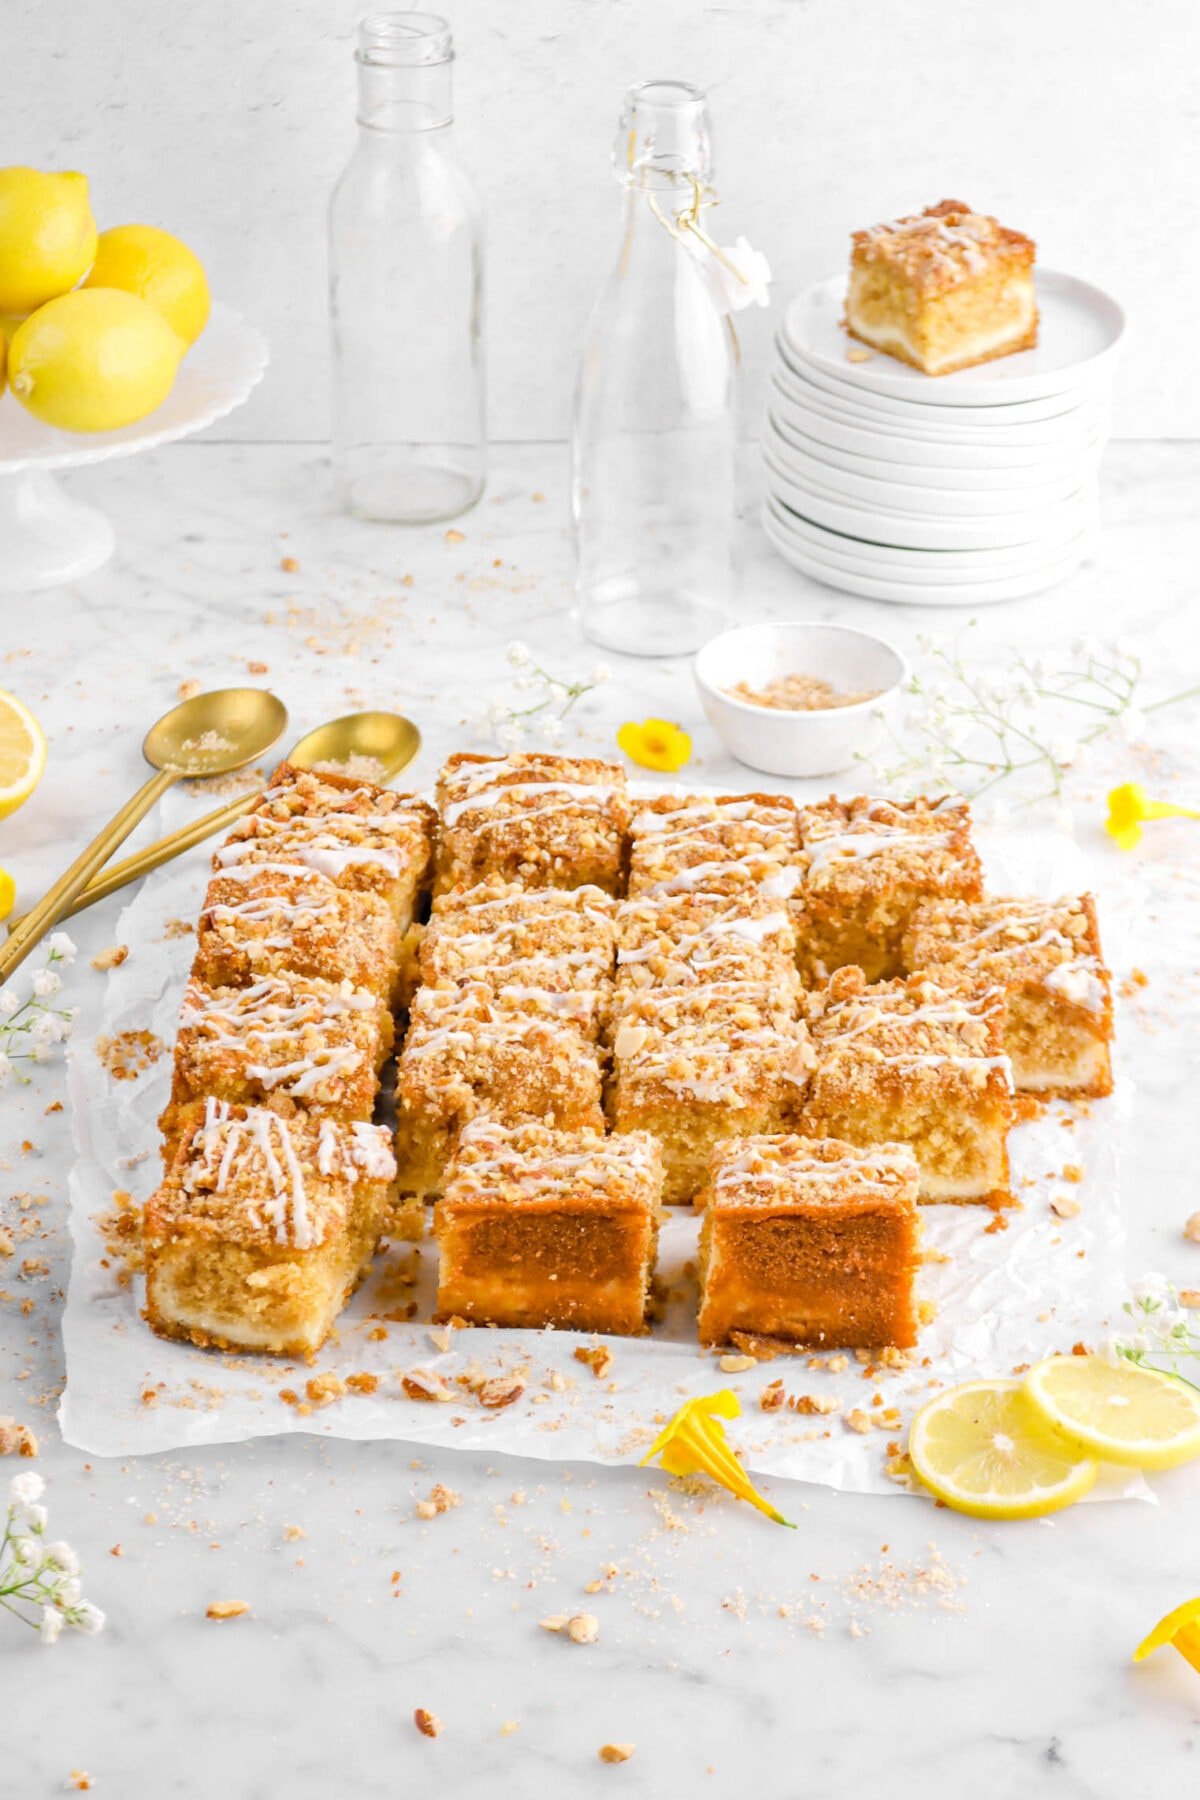 angled photo of lemon coffee cake with sliced pulled away on parchment paper, slice on stack of plates behind, with flowers around